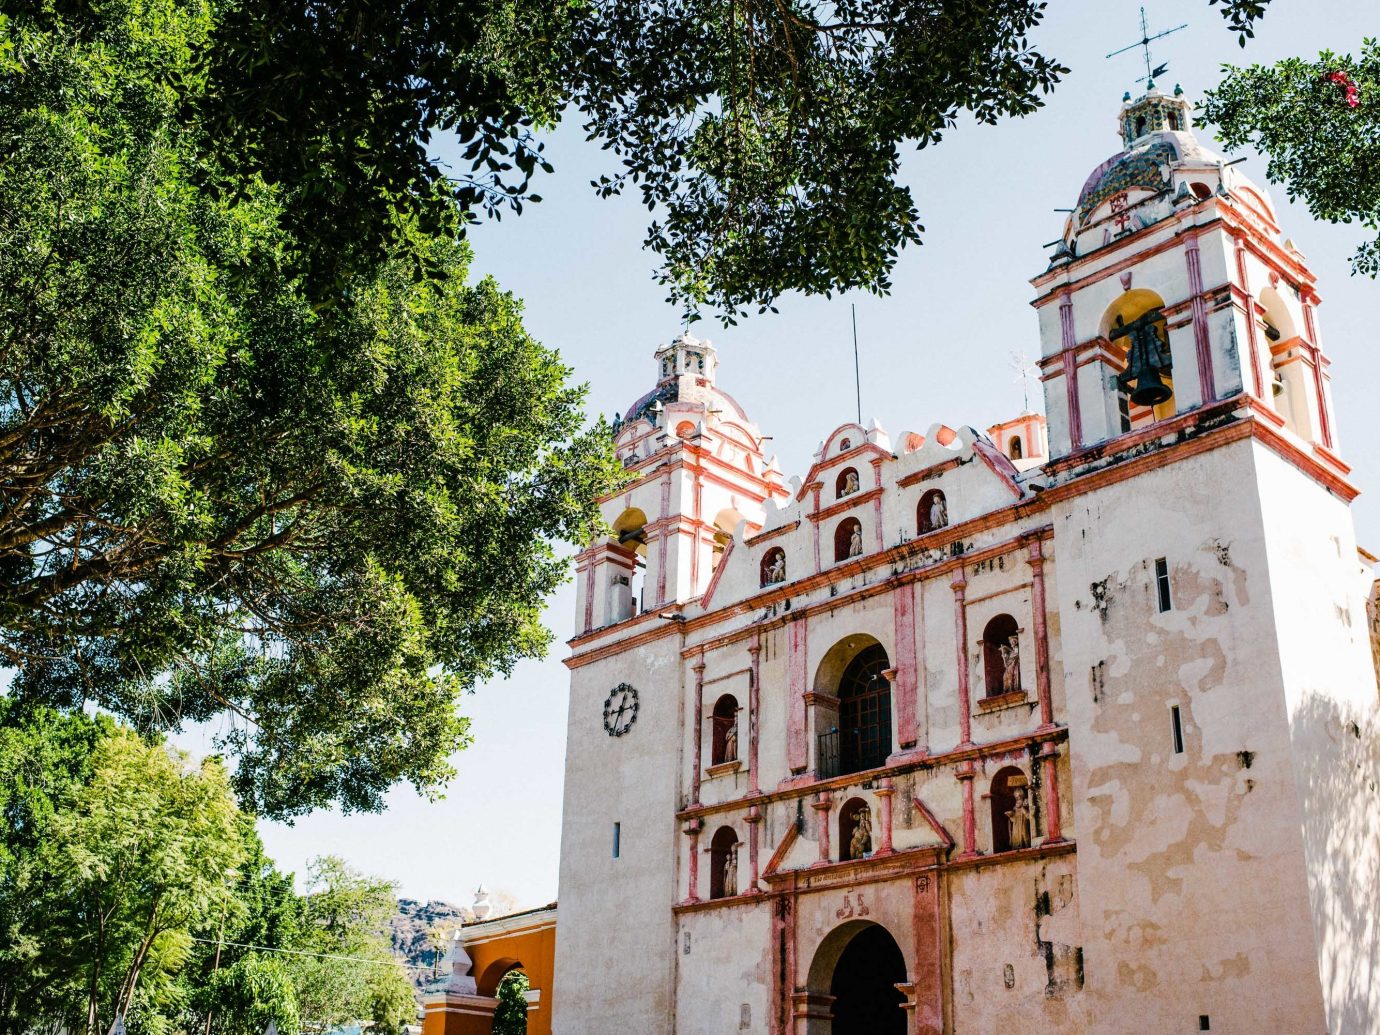 Arts + Culture Mexico Oaxaca Trip Ideas building sky historic site château tree tourist attraction palace facade monastery tourism hacienda medieval architecture place of worship estate City Church